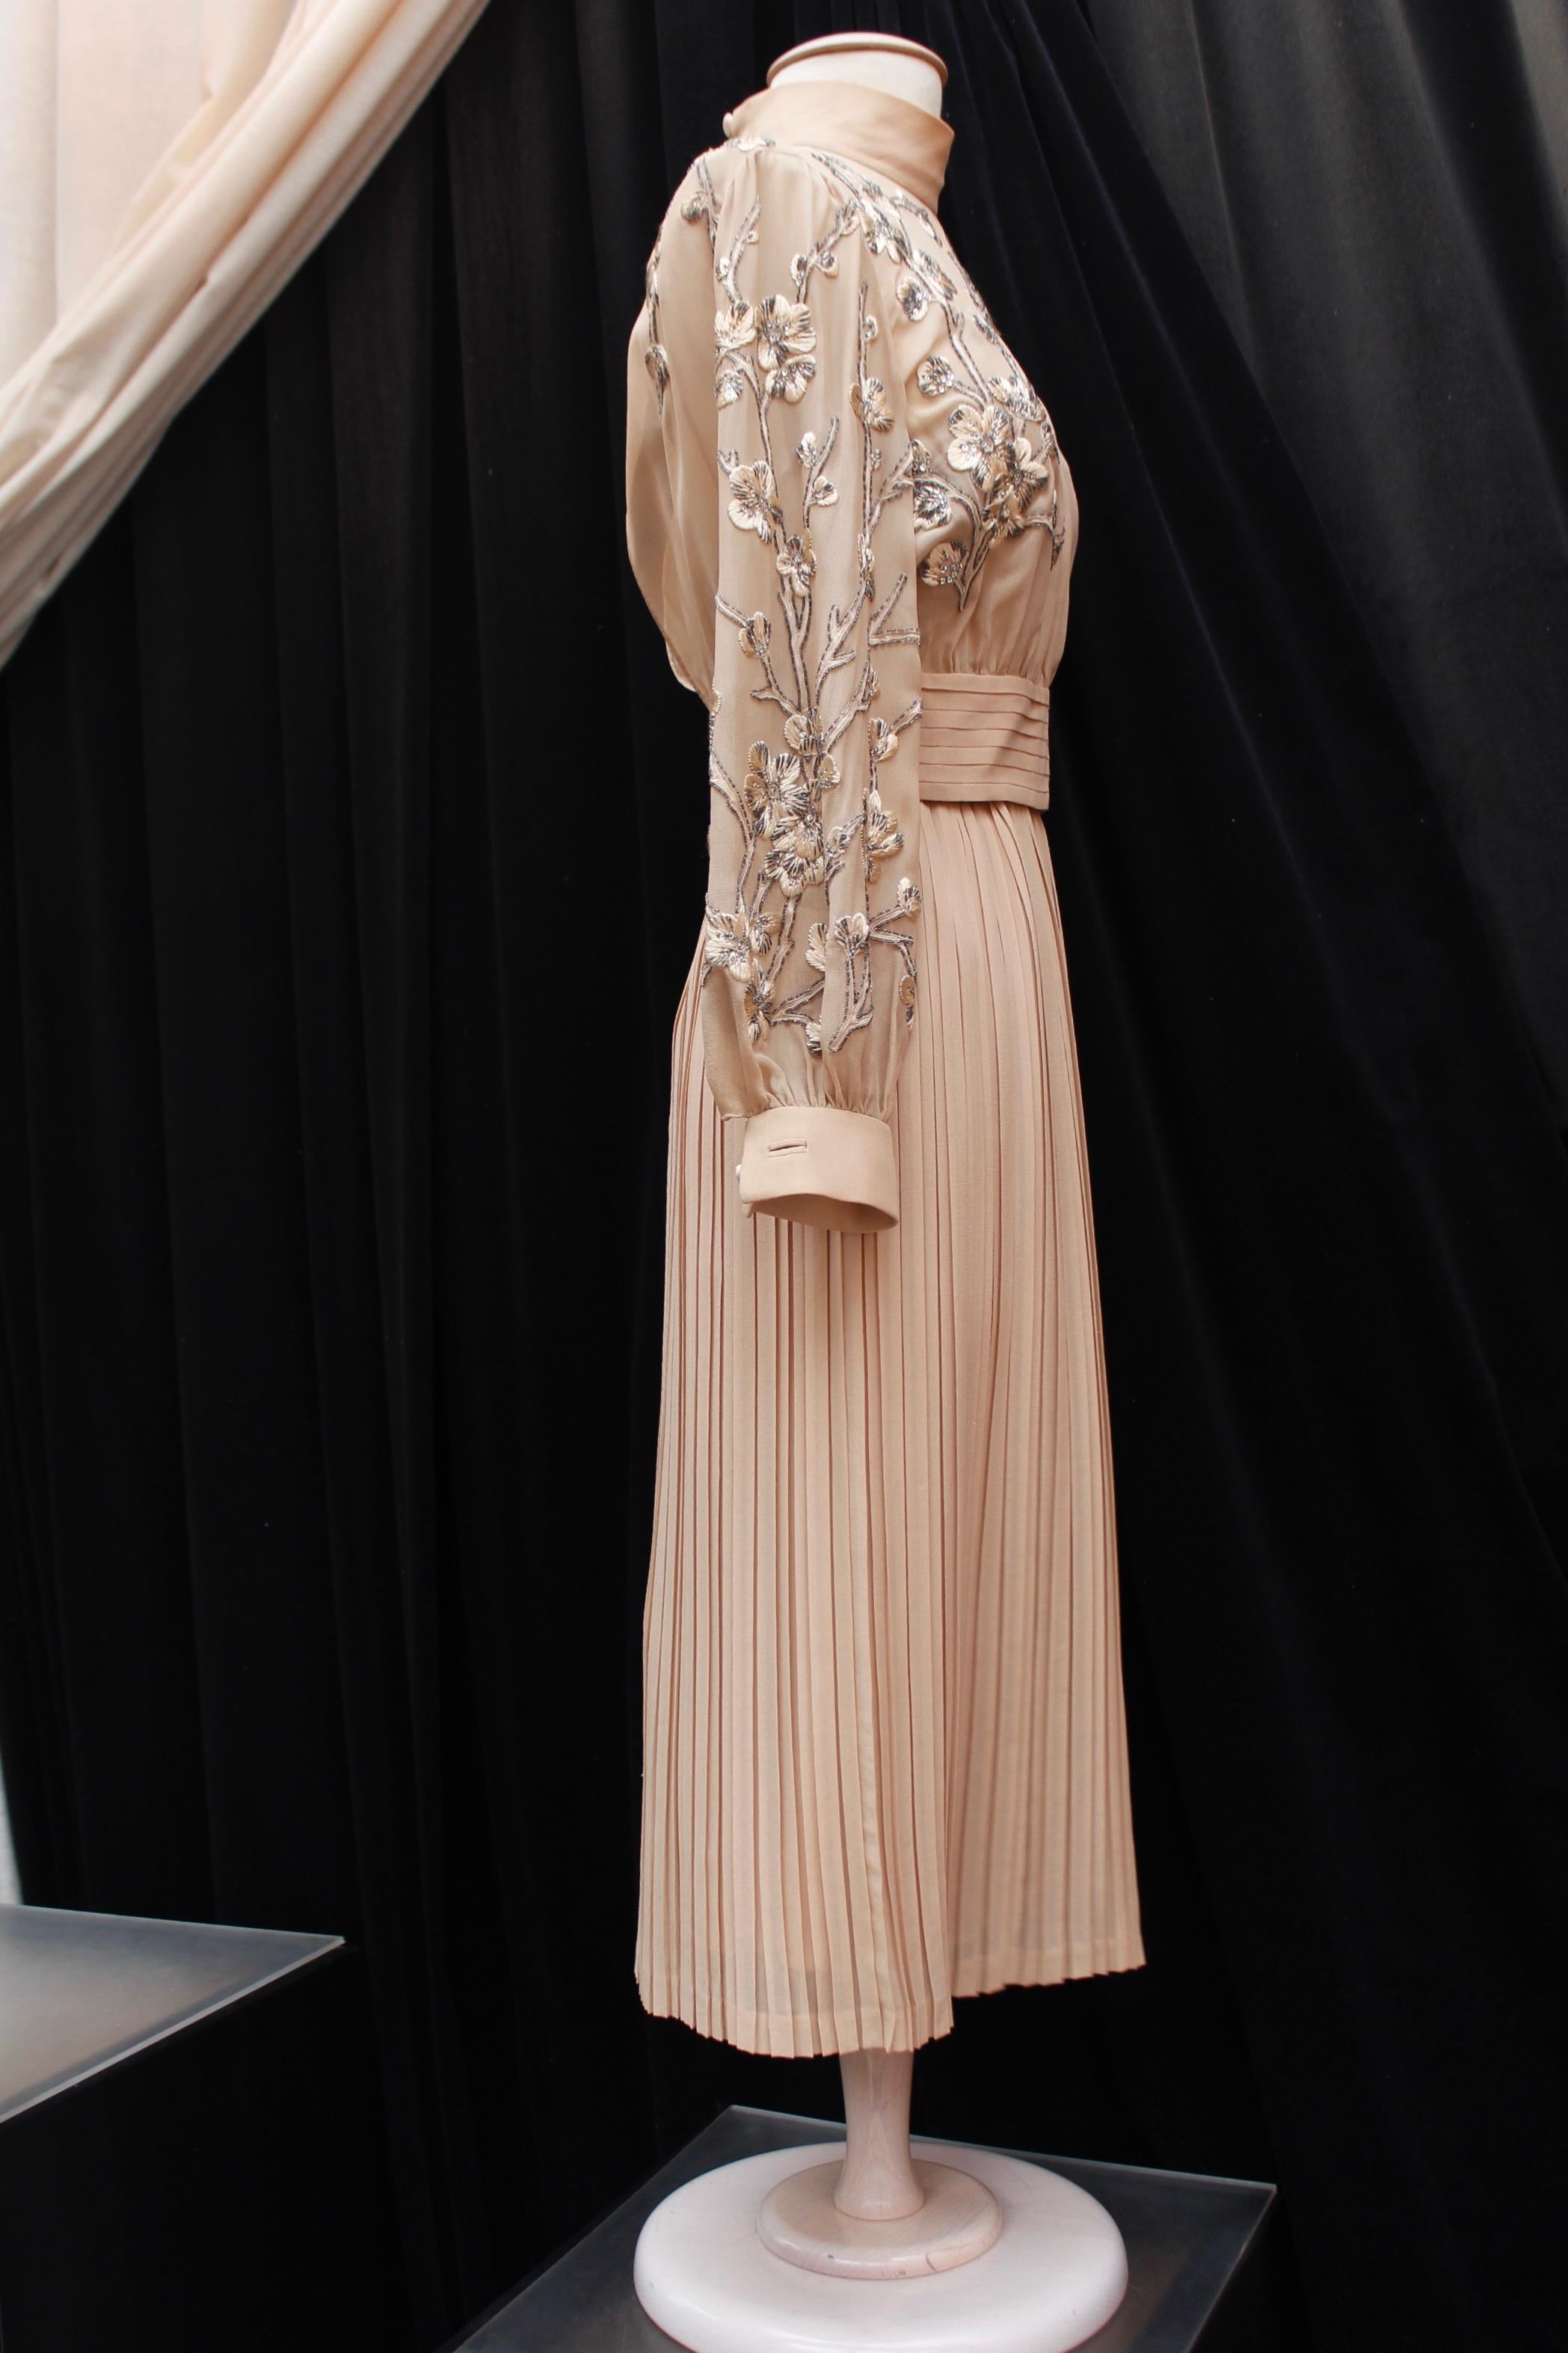 VALENTINO COUTURE (Made in Italy) Lovely nude silk chiffon evening set comprised of a dress and a top. The dress features a skater cut with pleats from the waist down and thin shoulder straps. It is lined with silk chiffon and closes with a back